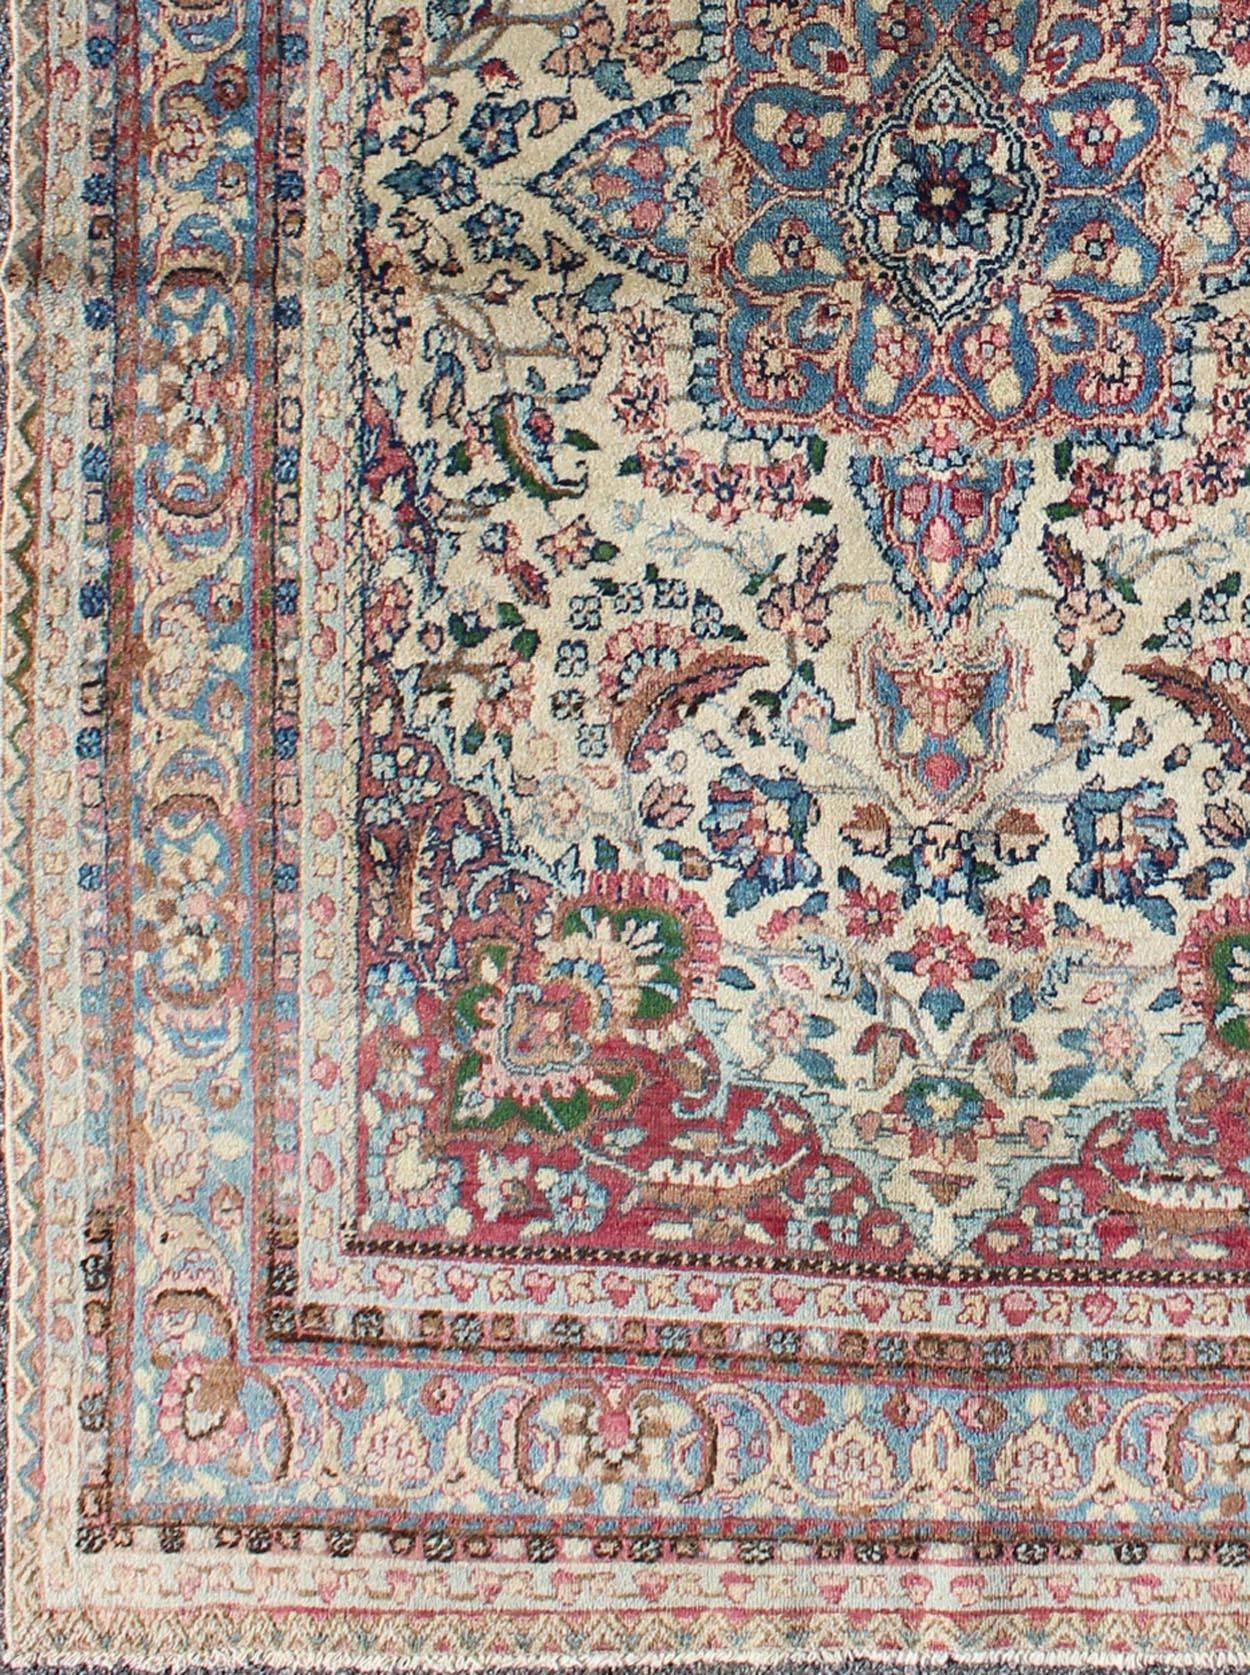 Ornately detailed antique Persian Lavar Kerman rug with fldral Design, rug e-0905, country of origin / type: Iran / Lavar Kerman, circa 1910.

This large, antique Persian Lavar Kerman rug features an ornate royal blue centre medallion. The ivory